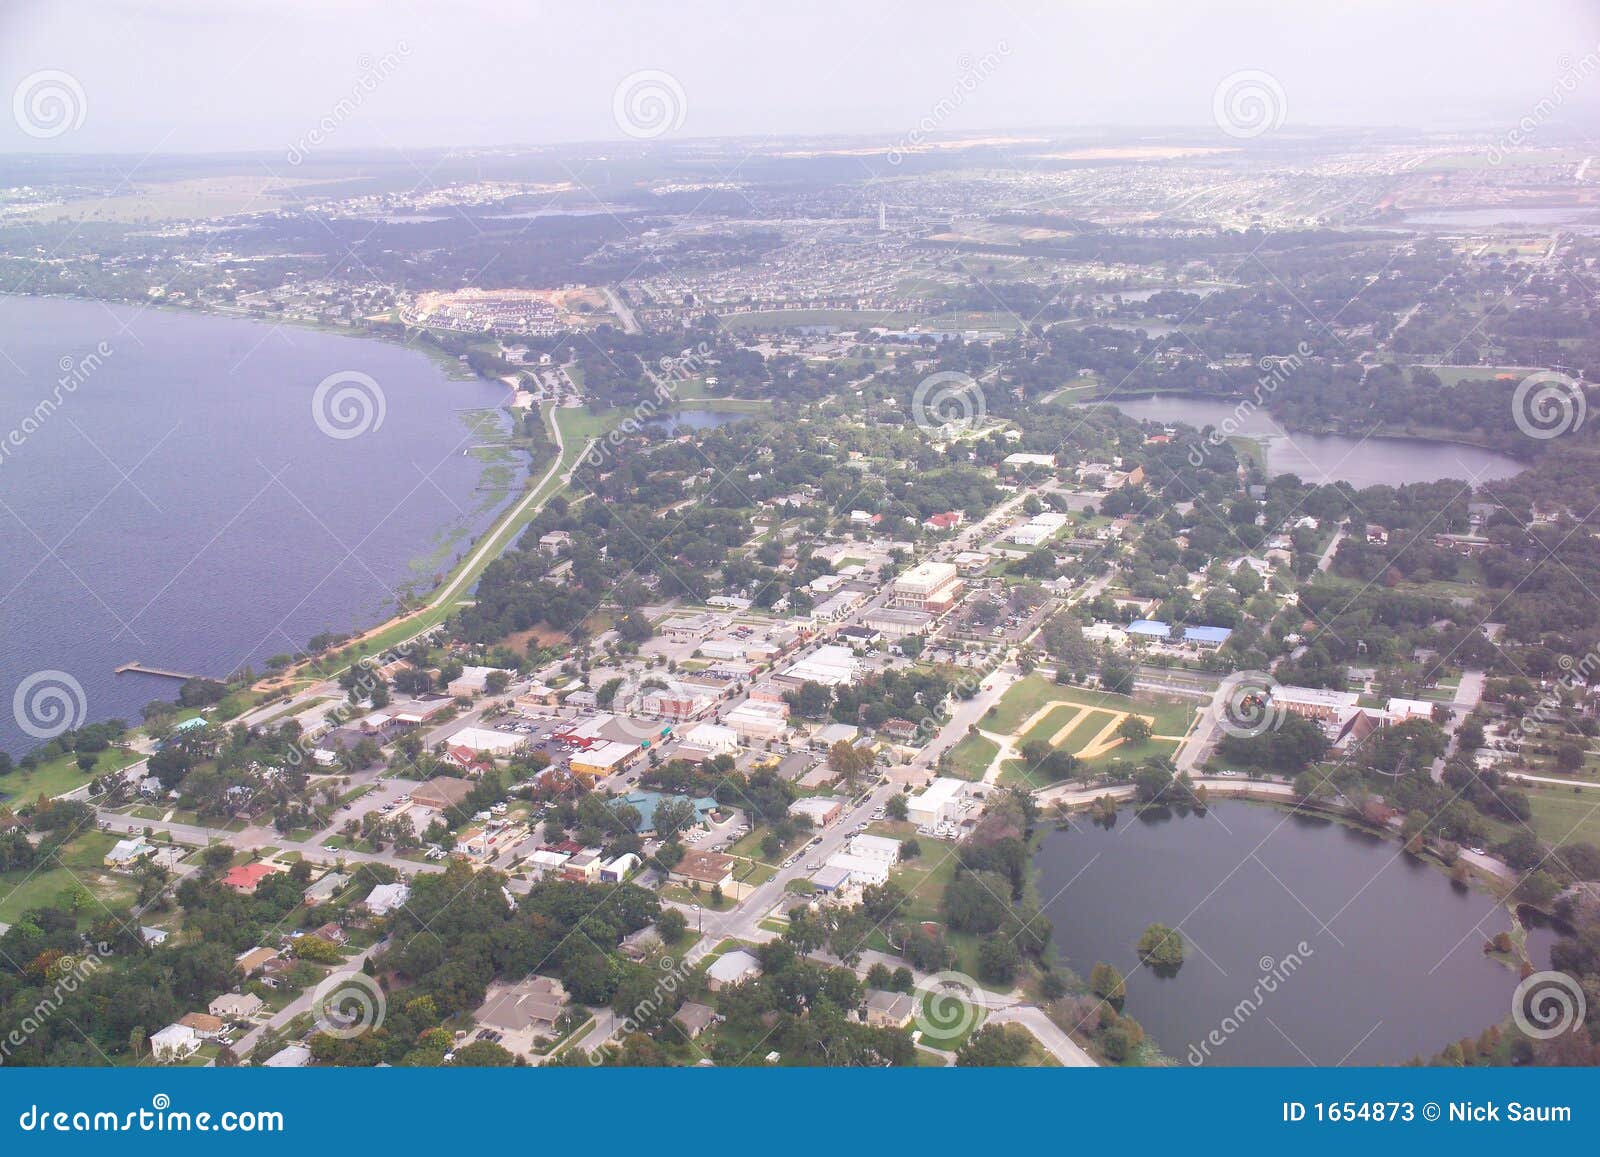 clermont, fl downtown aerial view.